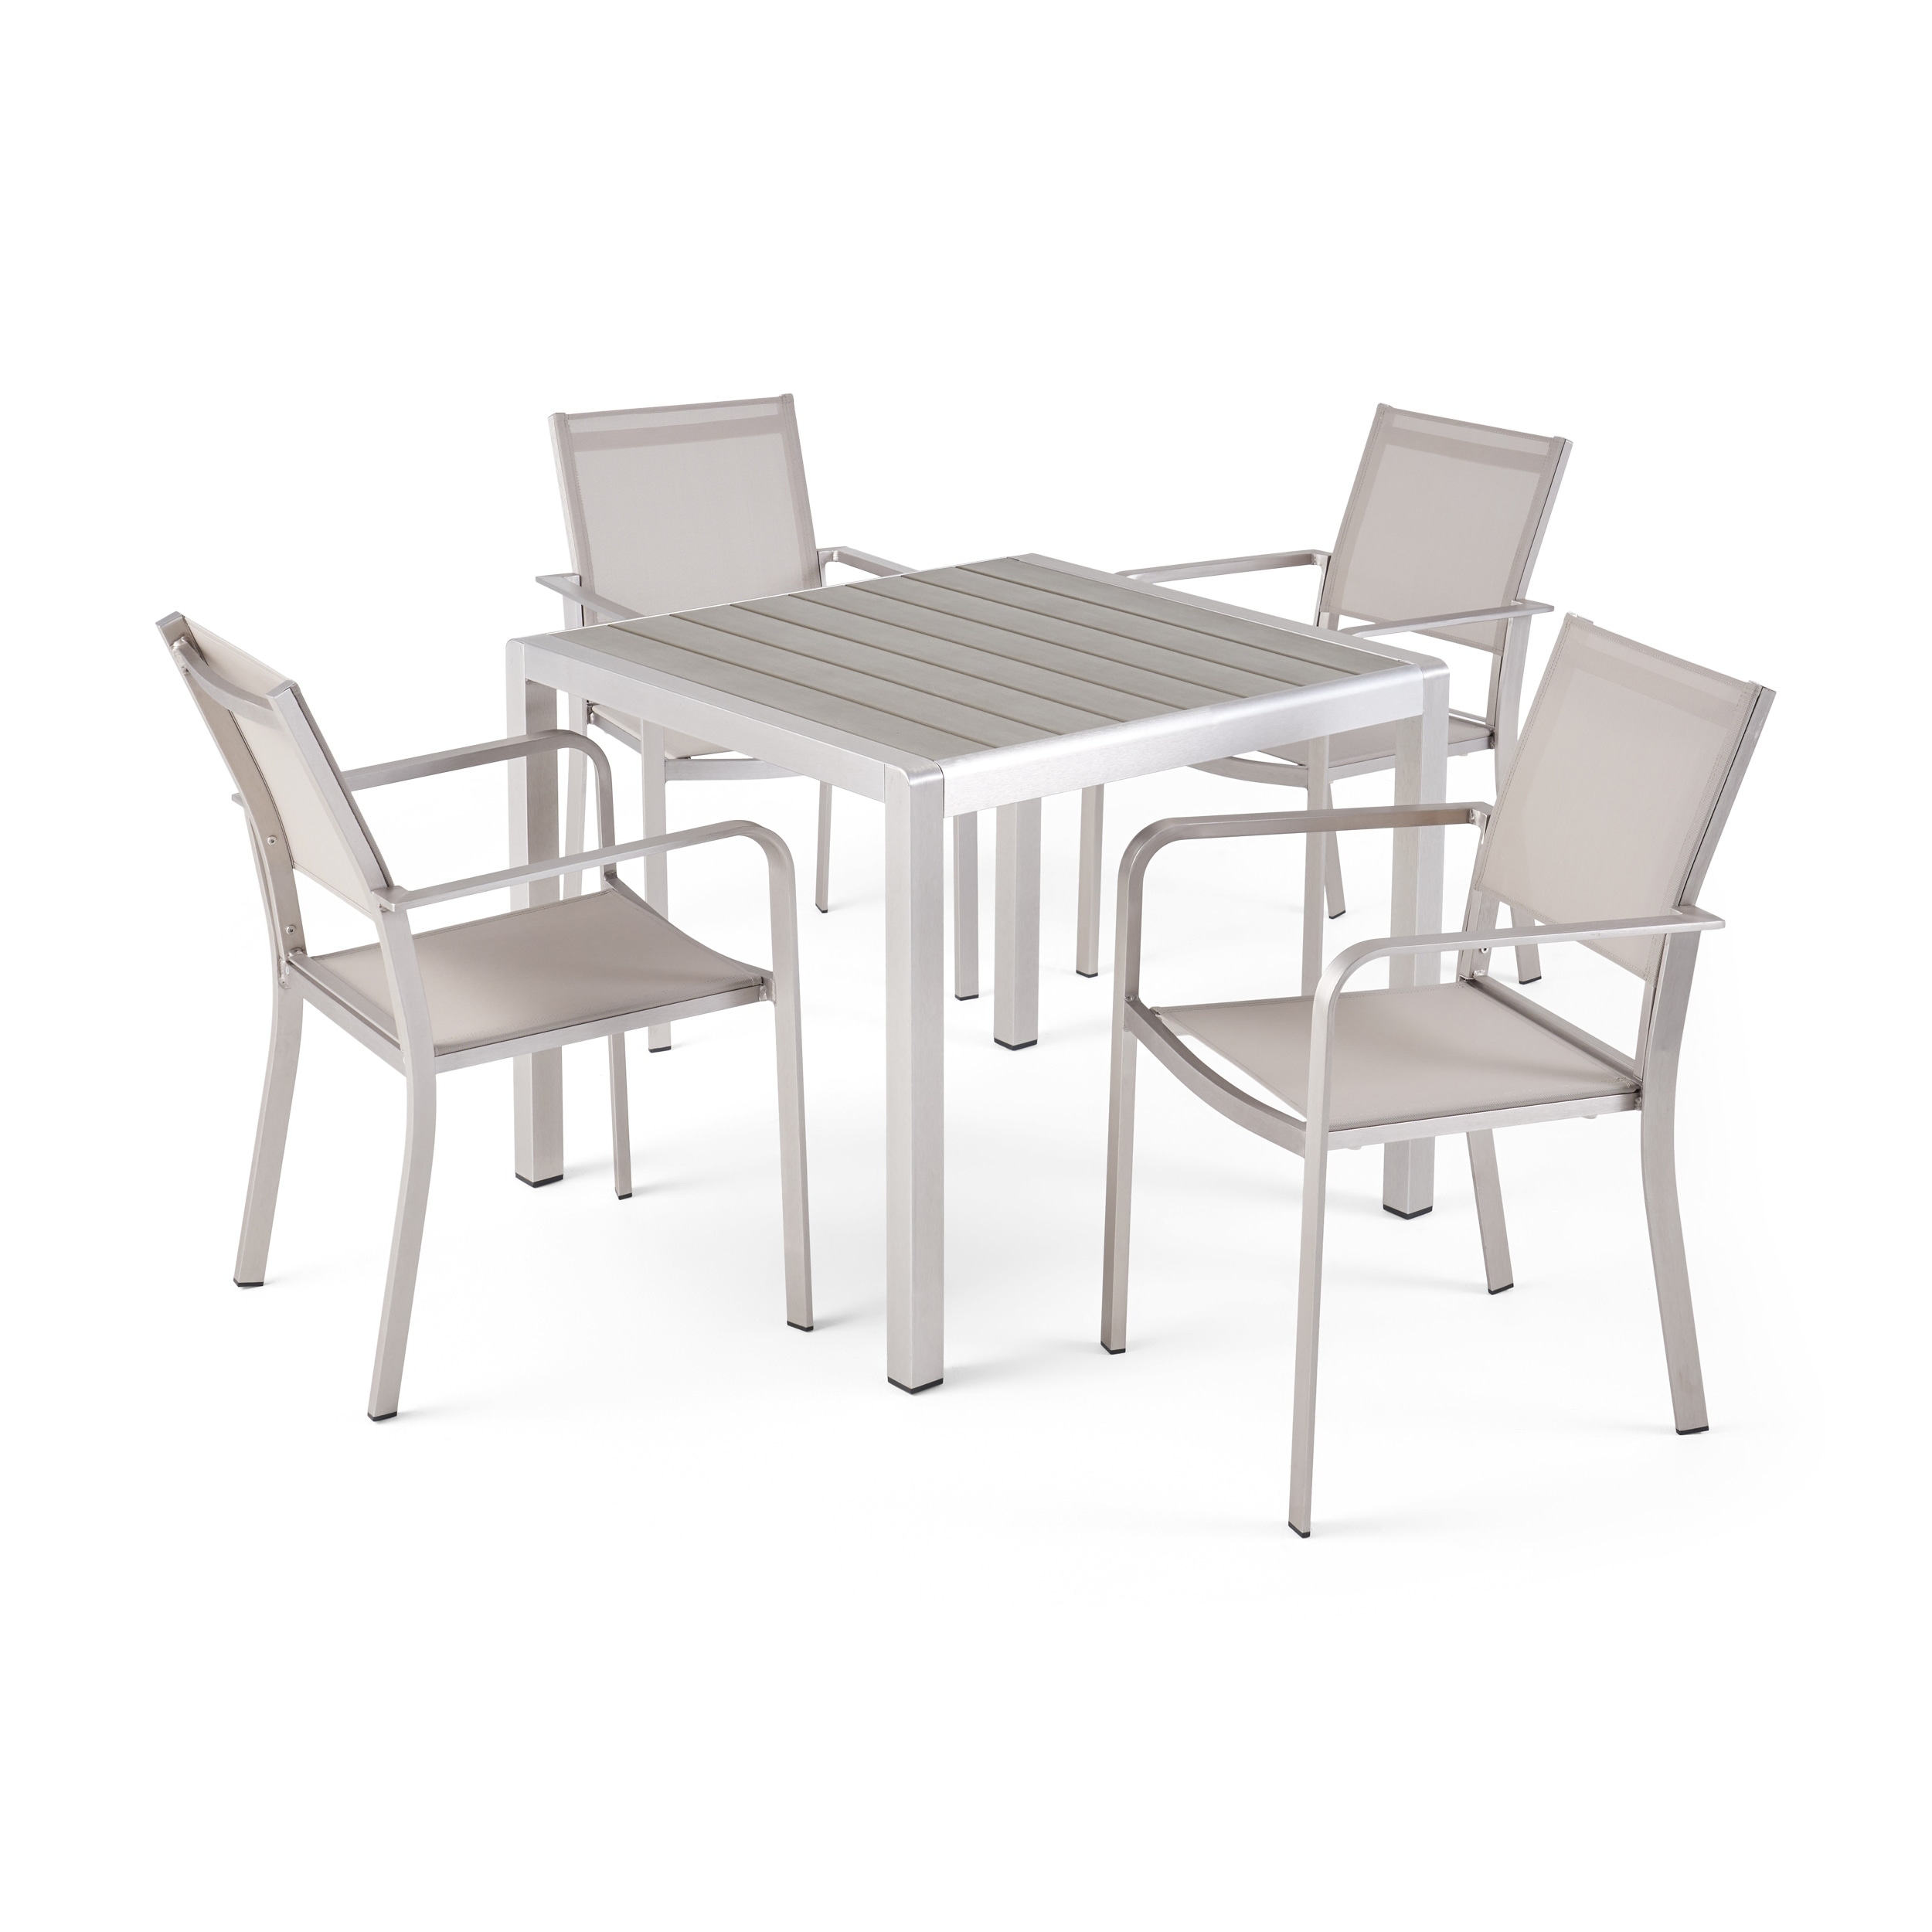 Boris Outdoor Modern 4 Seater Aluminum Dining Set With Faux Wood Table Top By Christopher Knight Home